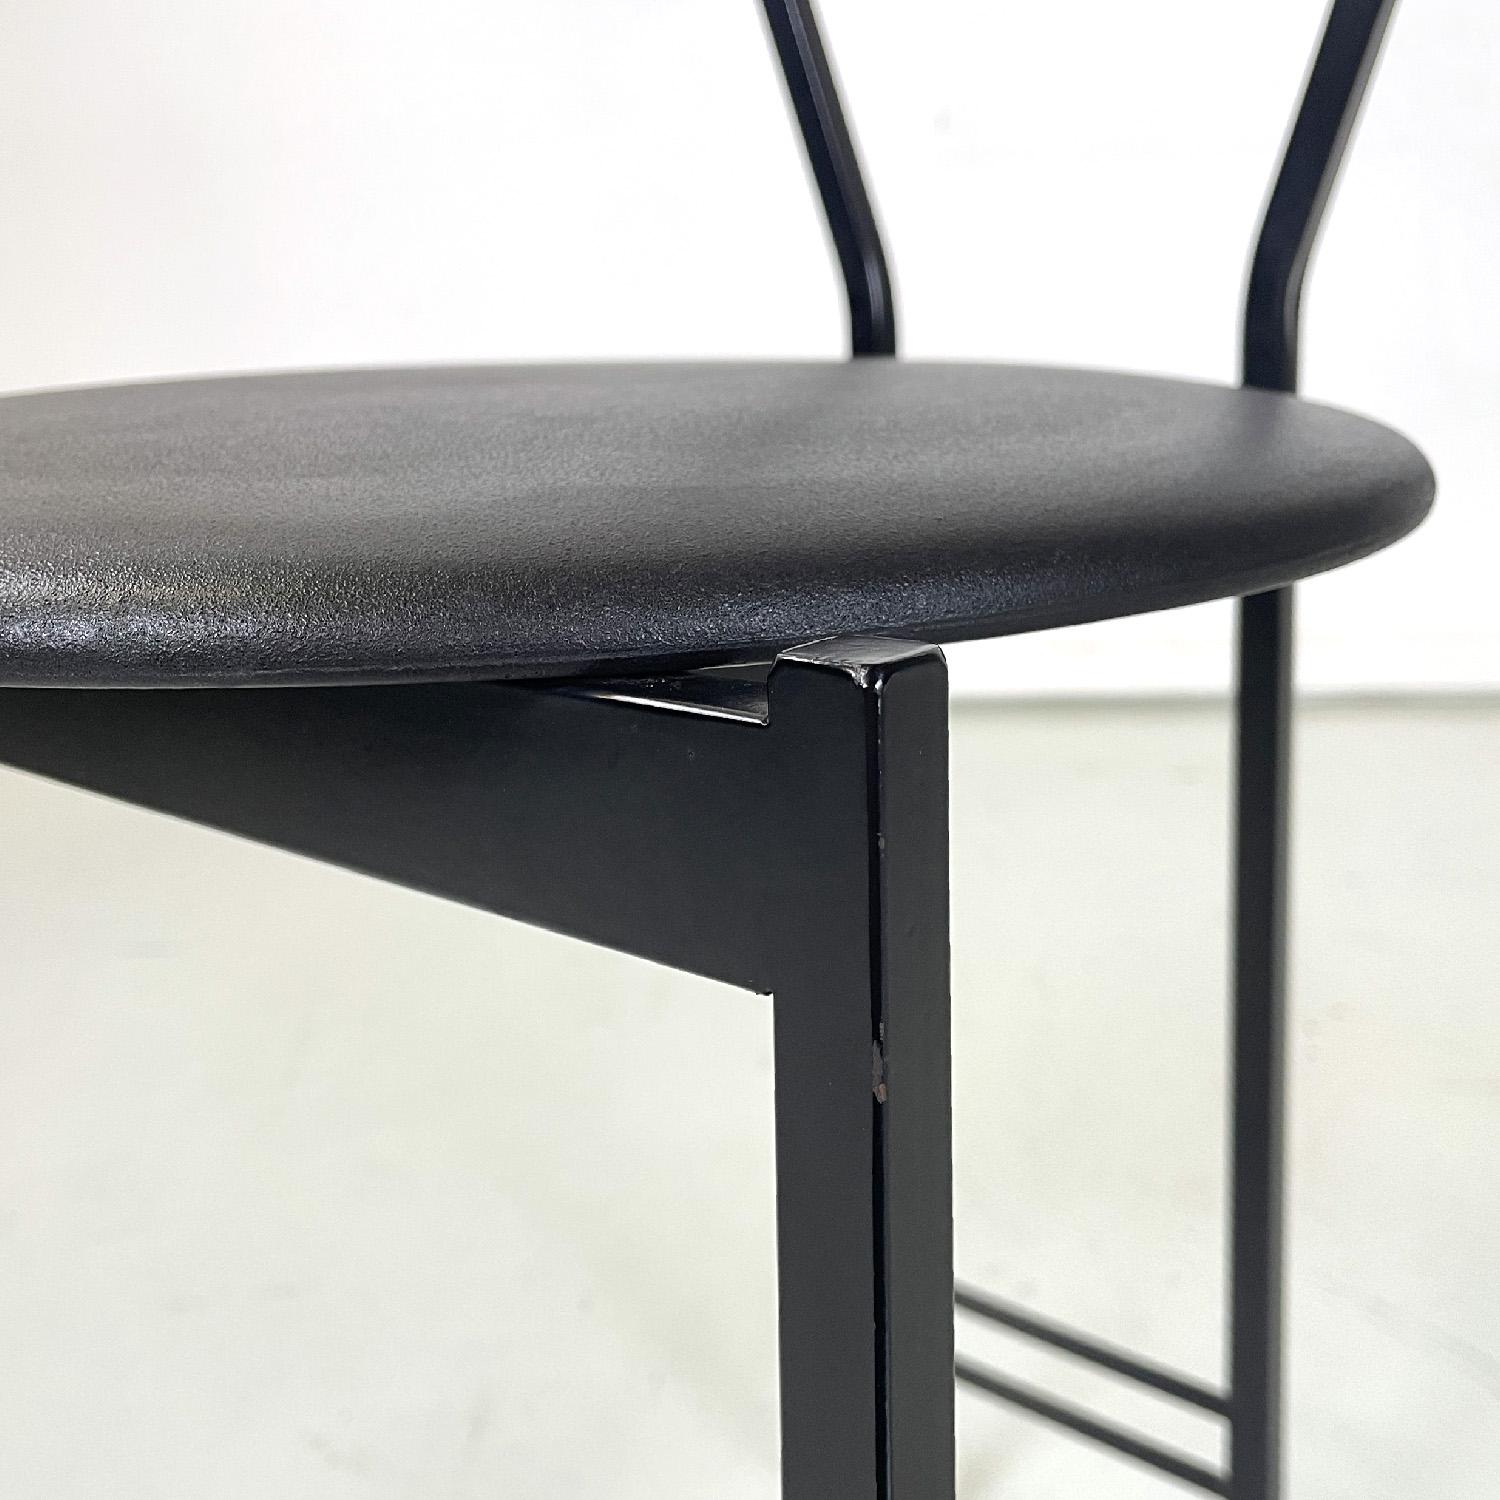 Italian modern chairs in black metal and rubber, 1980s For Sale 6